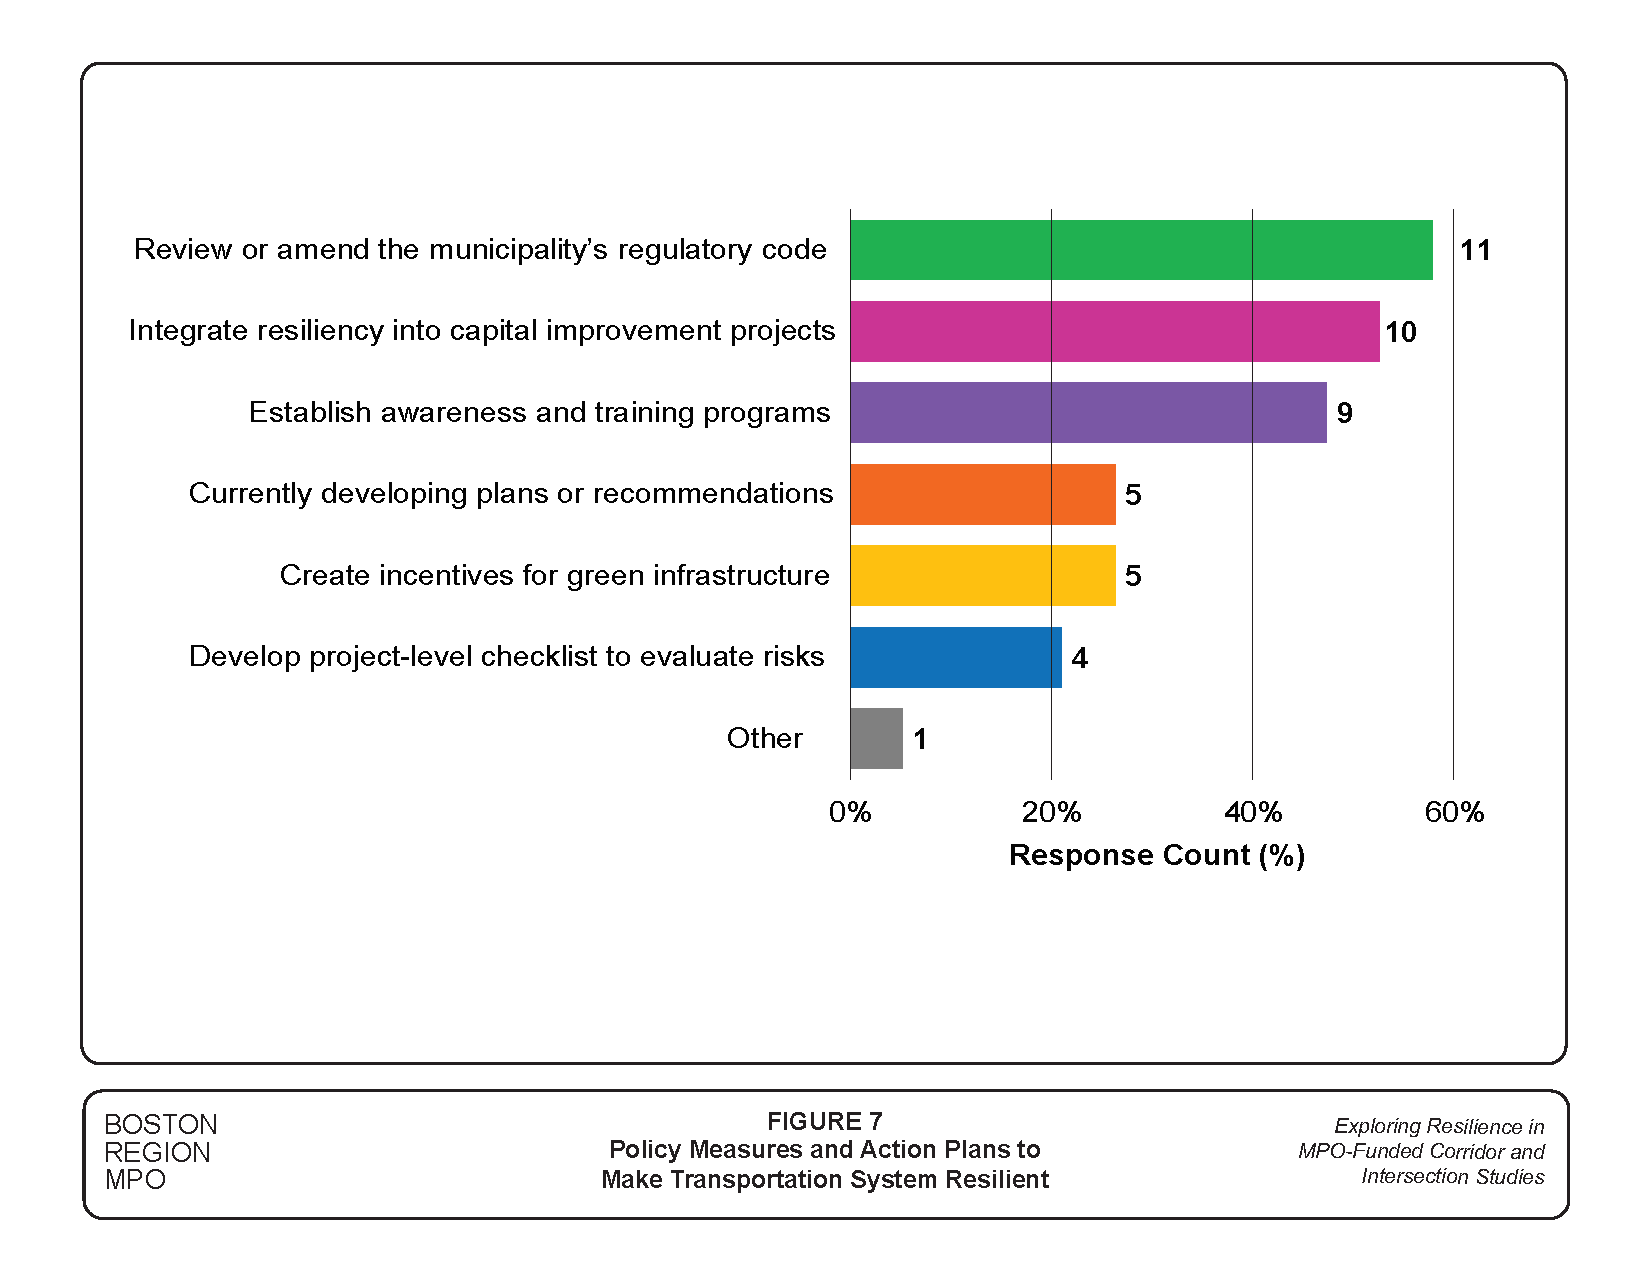 Figure 7 is a graph showing the survey results about policy measures or action plans that are incorporated in the Municipal Vulnerability Preparedness Program reports, Hazard Mitigation Plans, or Climate Action Plans to make the transportation system more resilient to climate hazards.